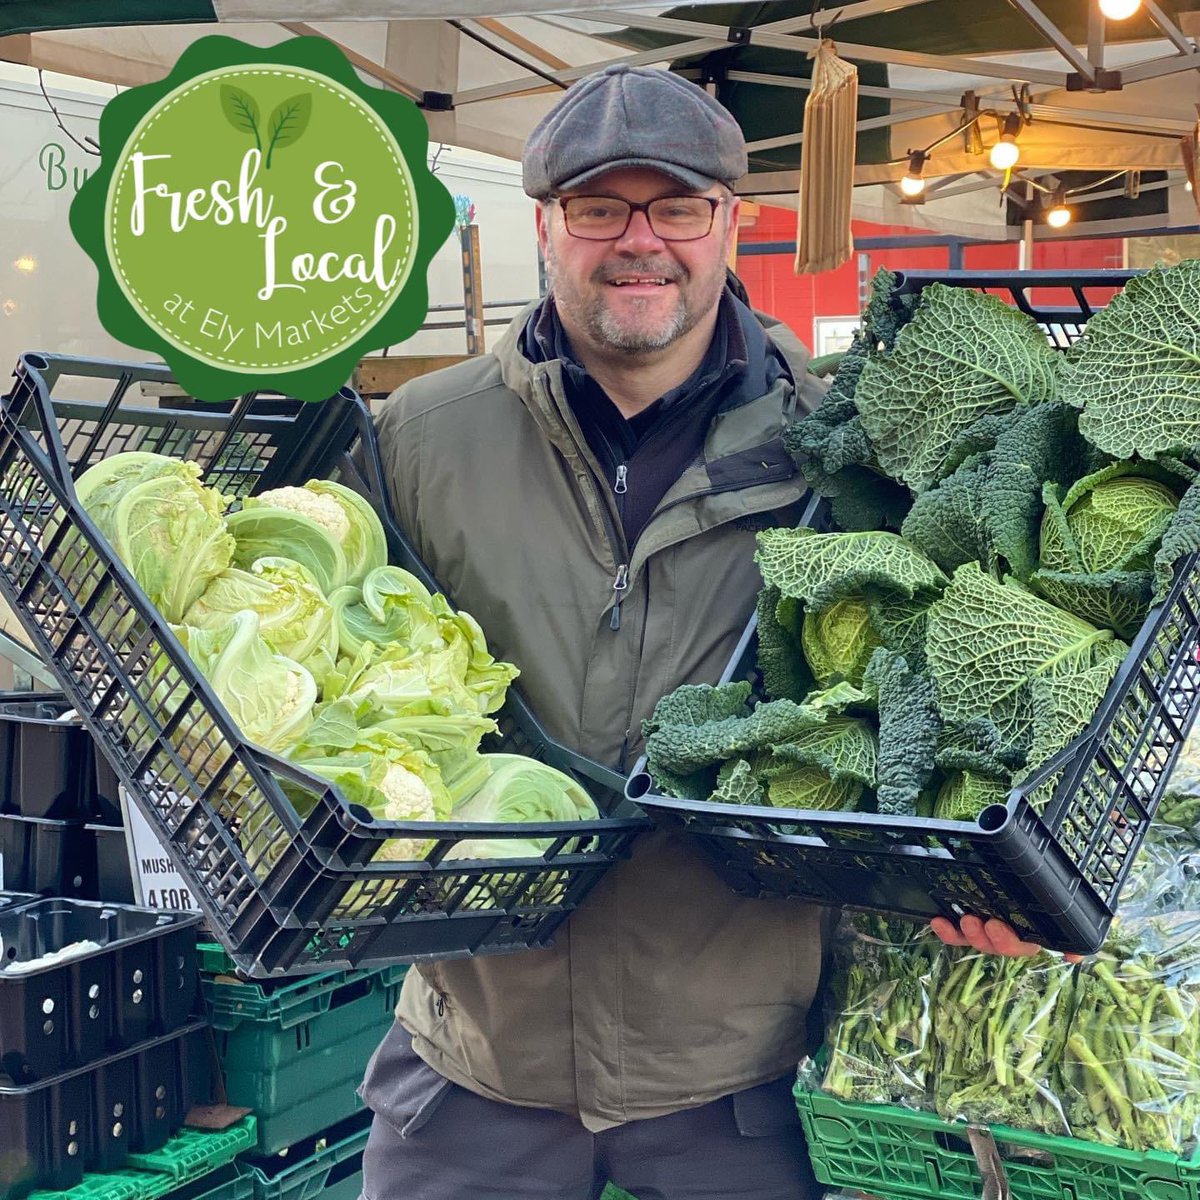 Visit us every Thursday @ElyMarkets Filled with the finest fresh & local produce. #freshproduce #ely #elymarkets #norfolkproducemarkets #norfolkproduce